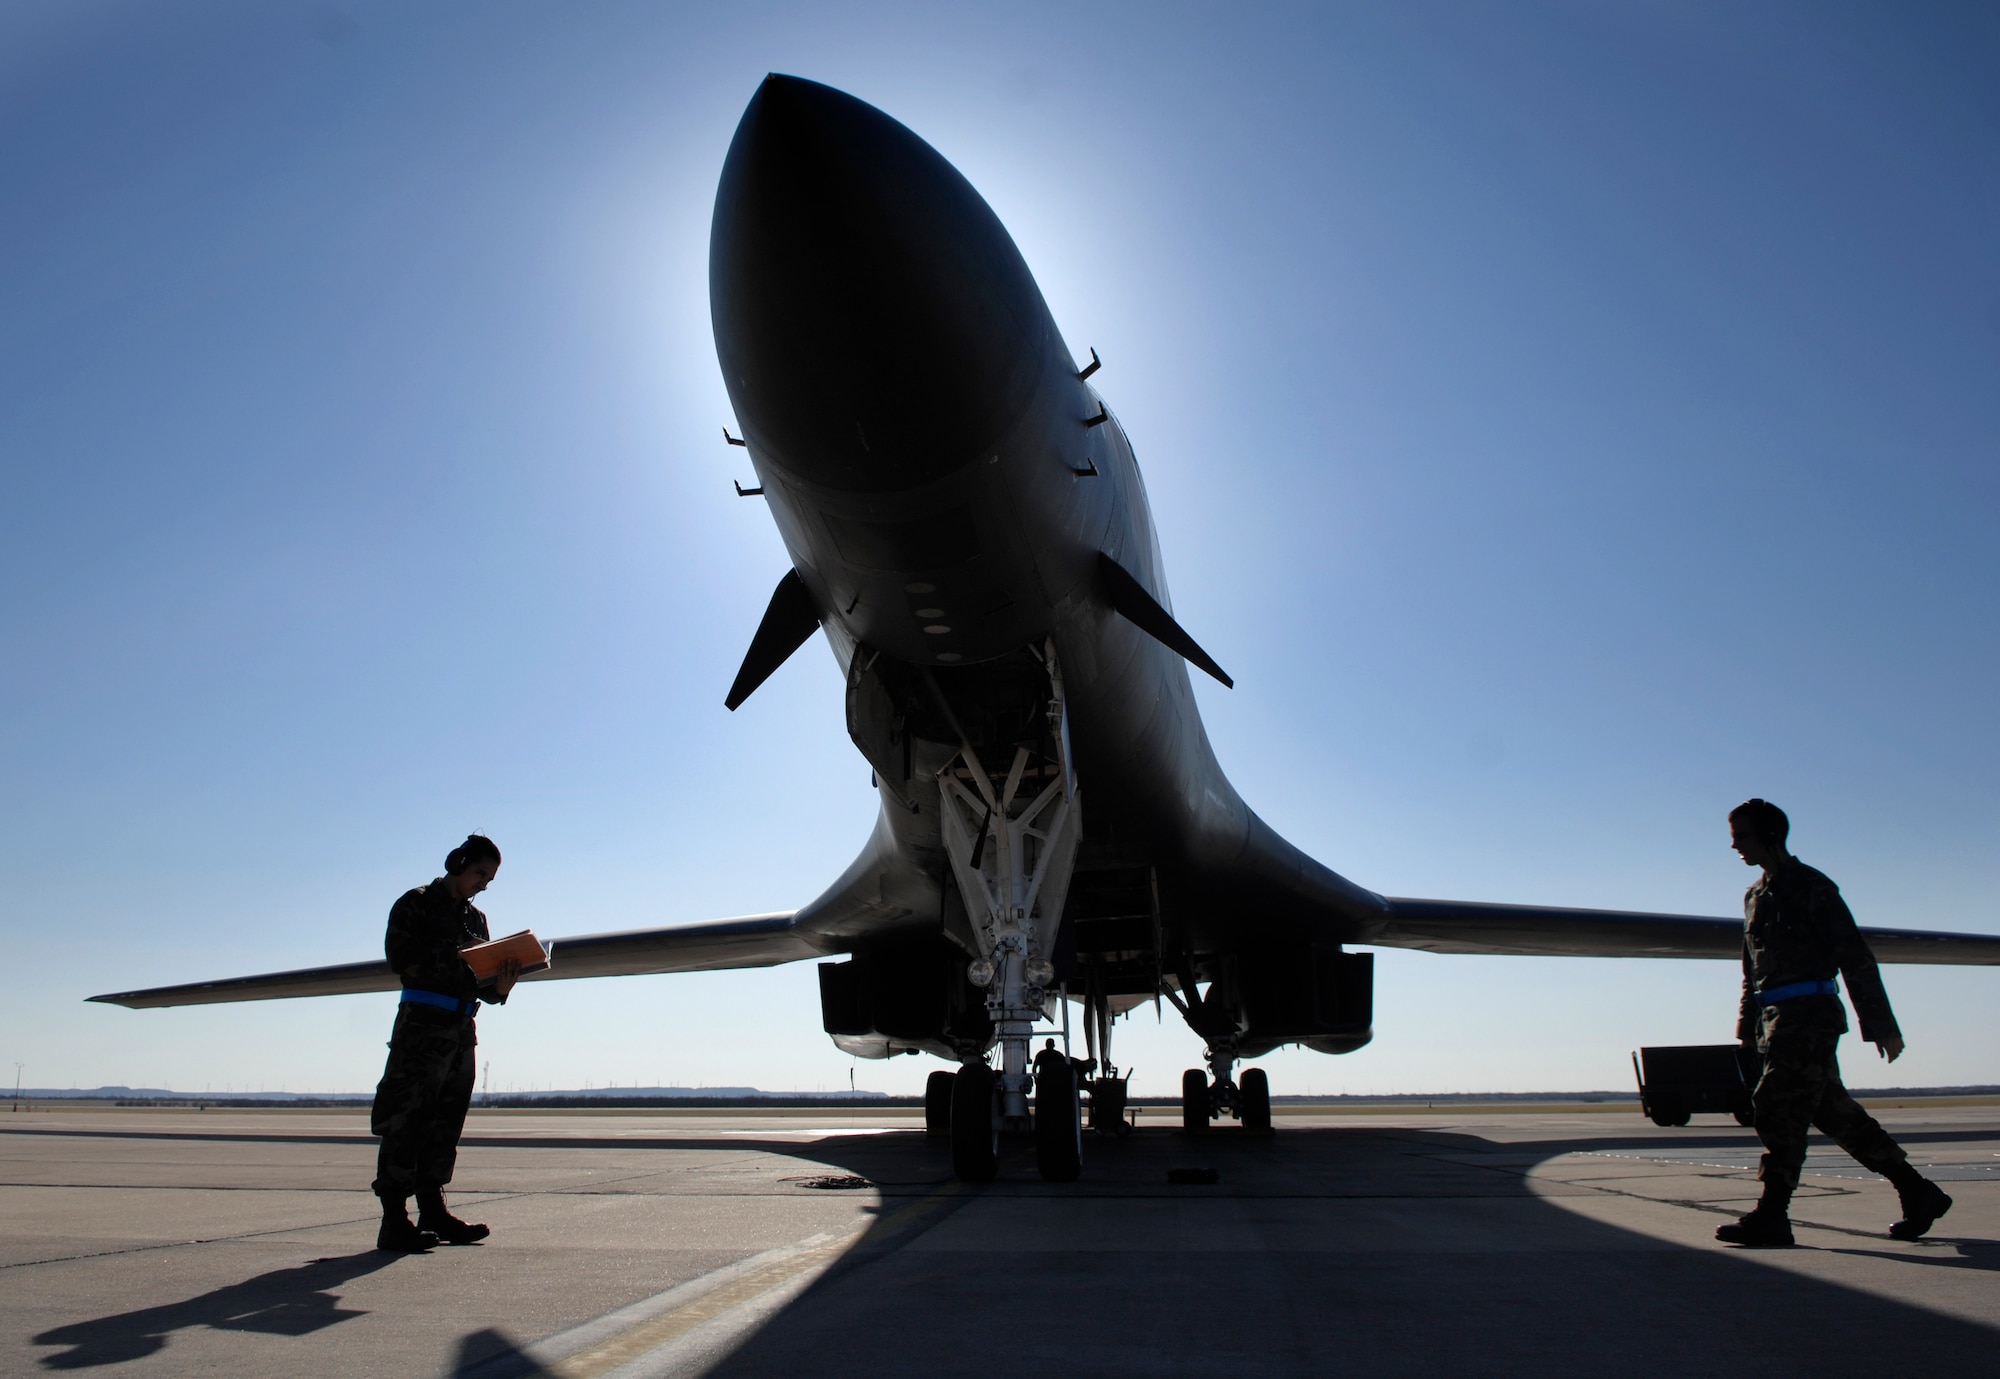 Senior Airman Hector Gonzalez and Airman 1st Class Jeffery Polllitt conduct an operational check on a B-1B Lancer March 19 at Dyess Air Force Base, Texas. The B-1B was the first aircraft to fly supersonic speeds using a 50/50 blend of synthetic and petroleum fuel over the White Sands Missile Range airspace in south-central New Mexico.  (U.S. Air Force photo/Tech. Sgt. Cecilio Ricardo)